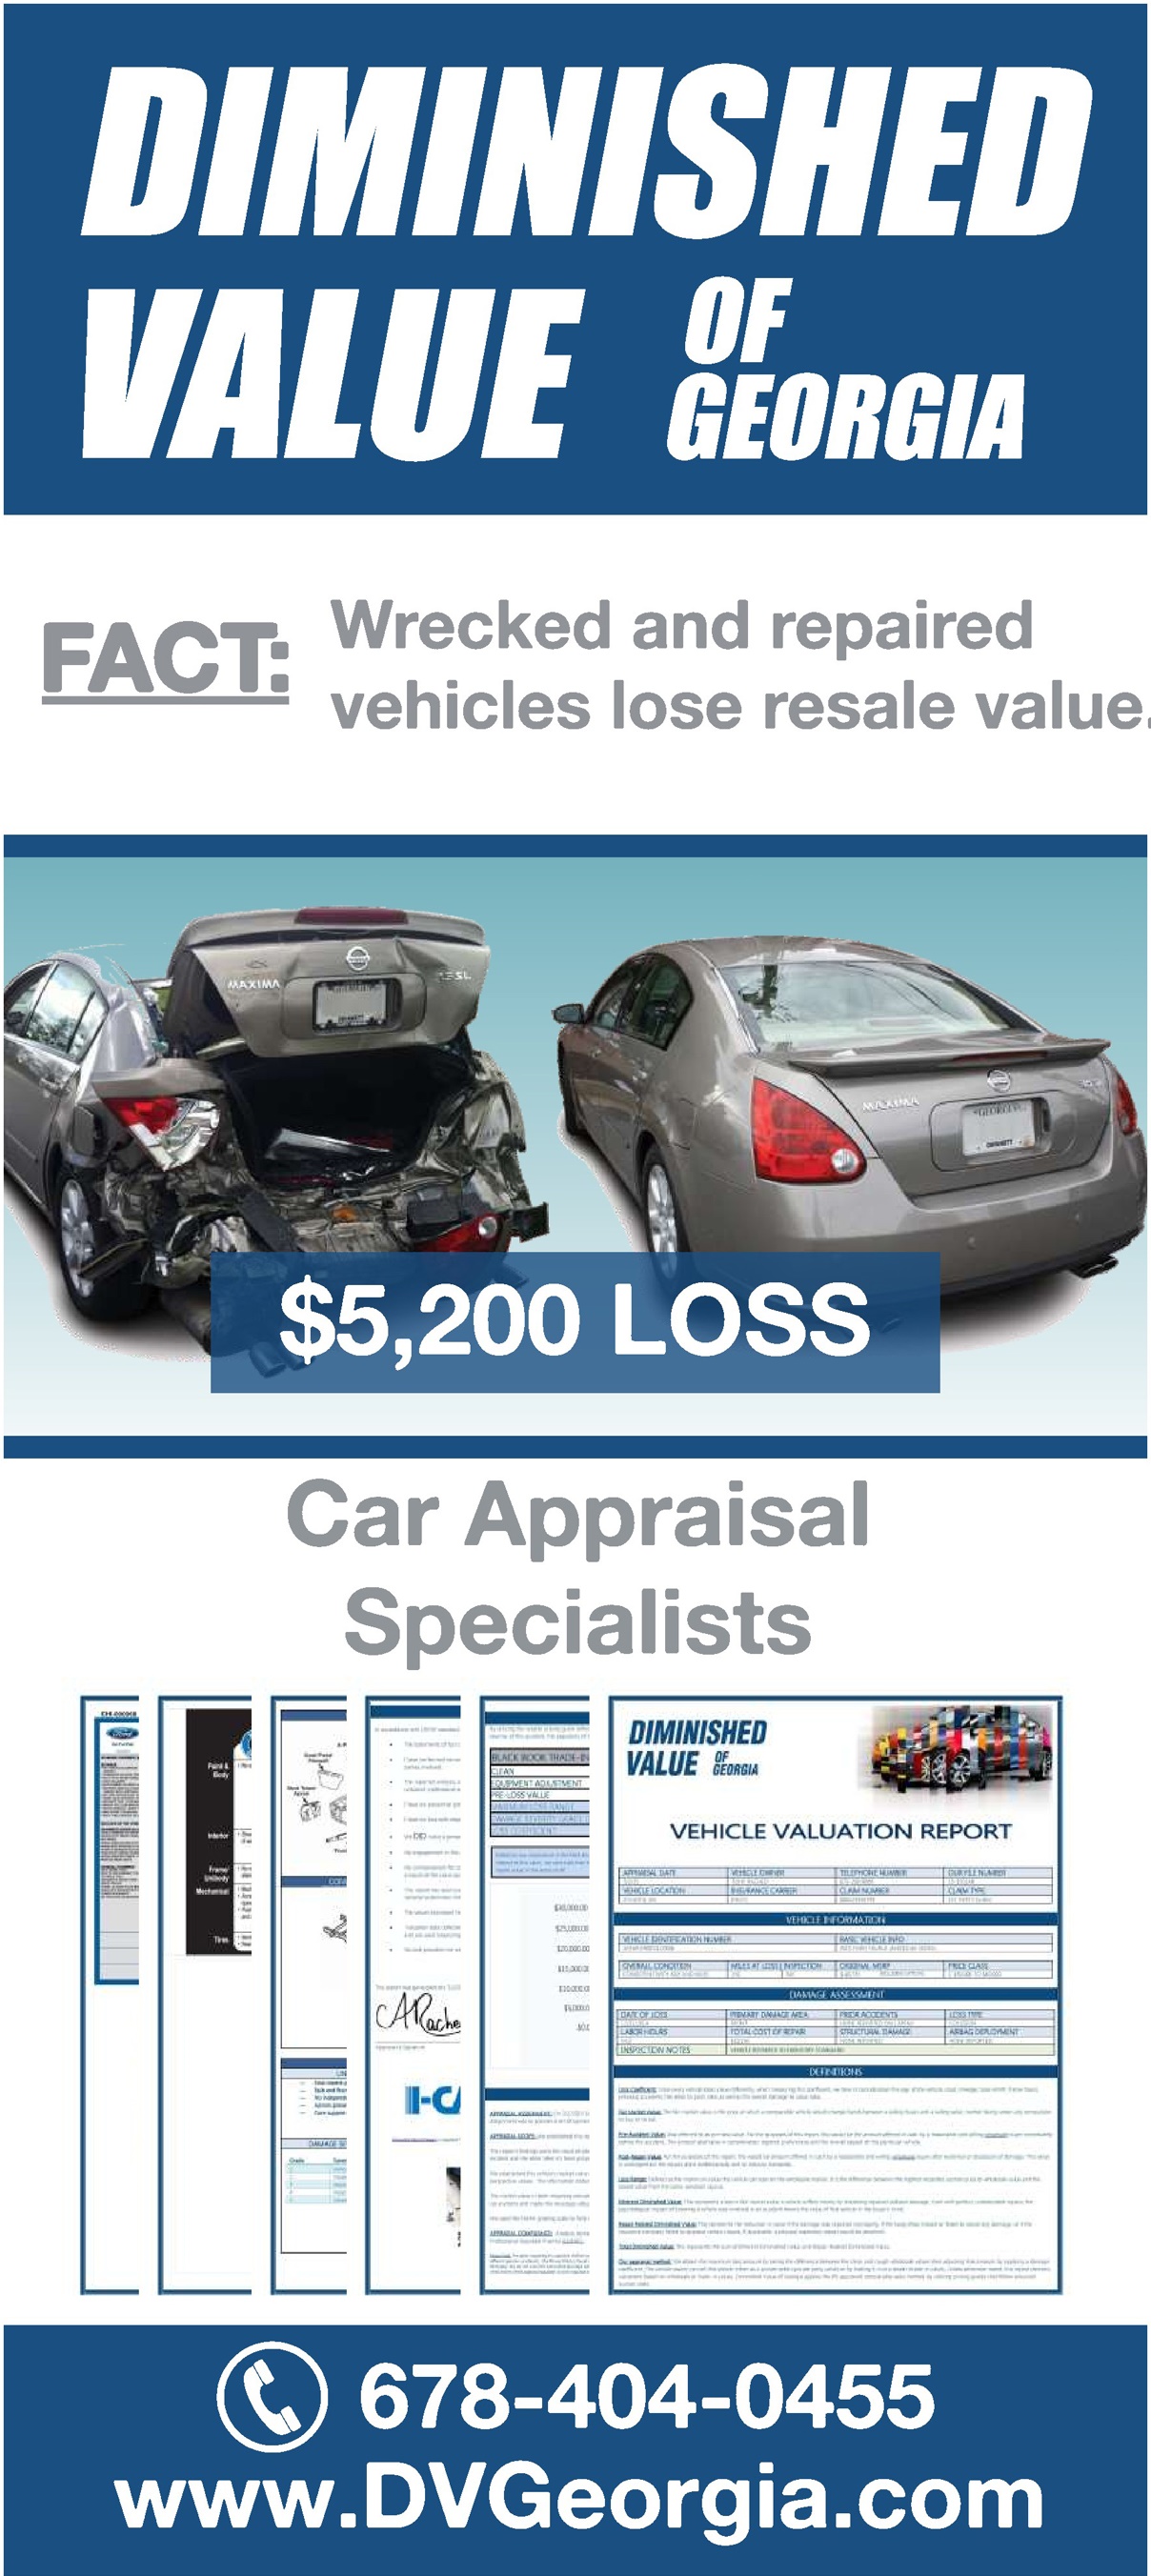 Diminished Value Appraisal